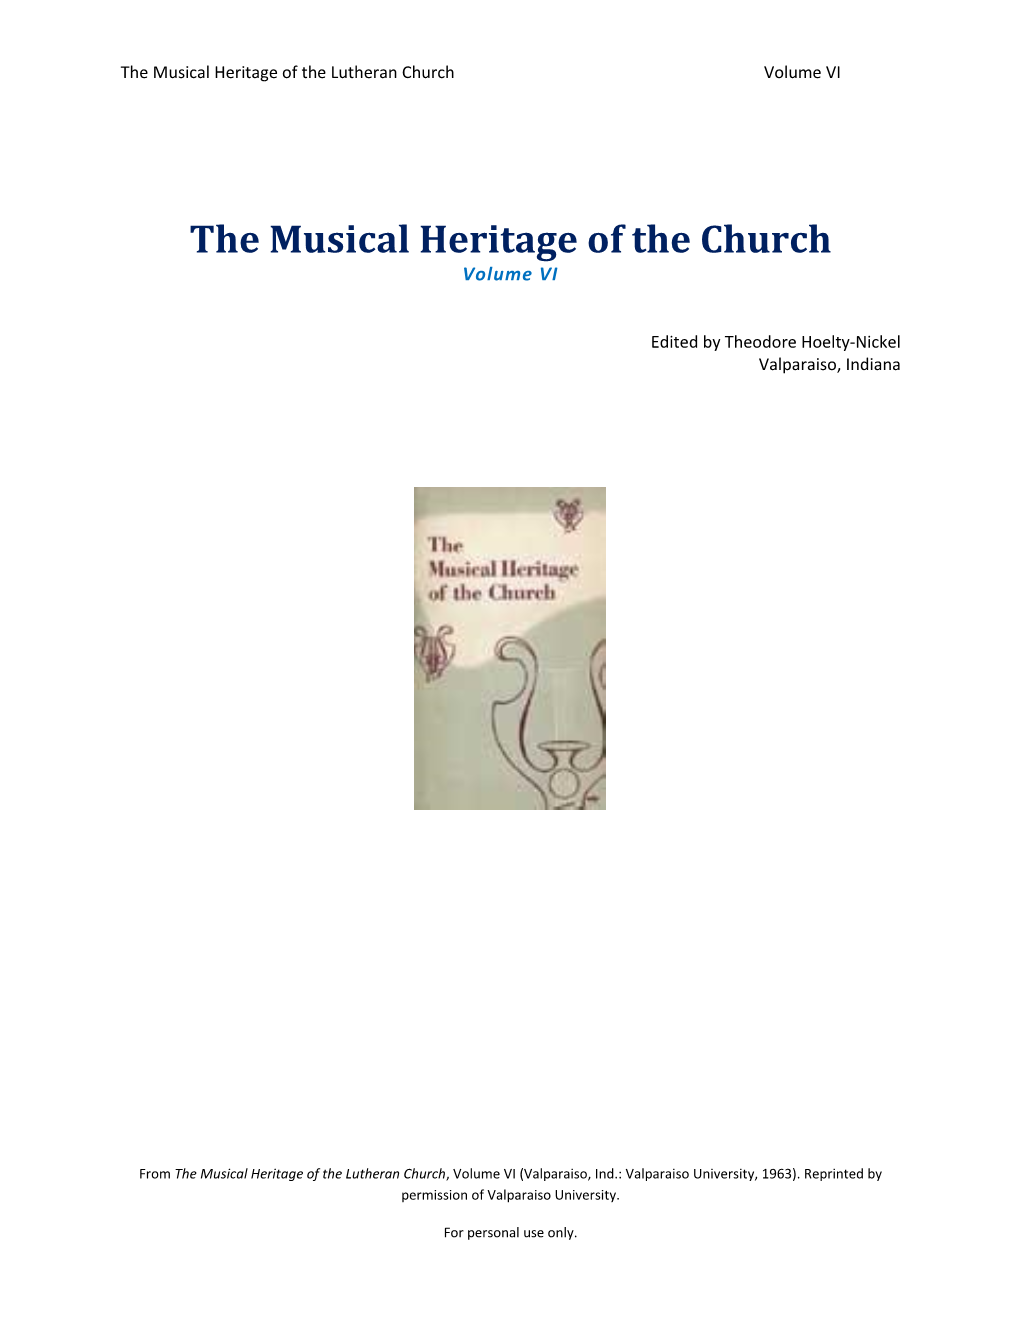 The Musical Heritage of the Church Volume VI